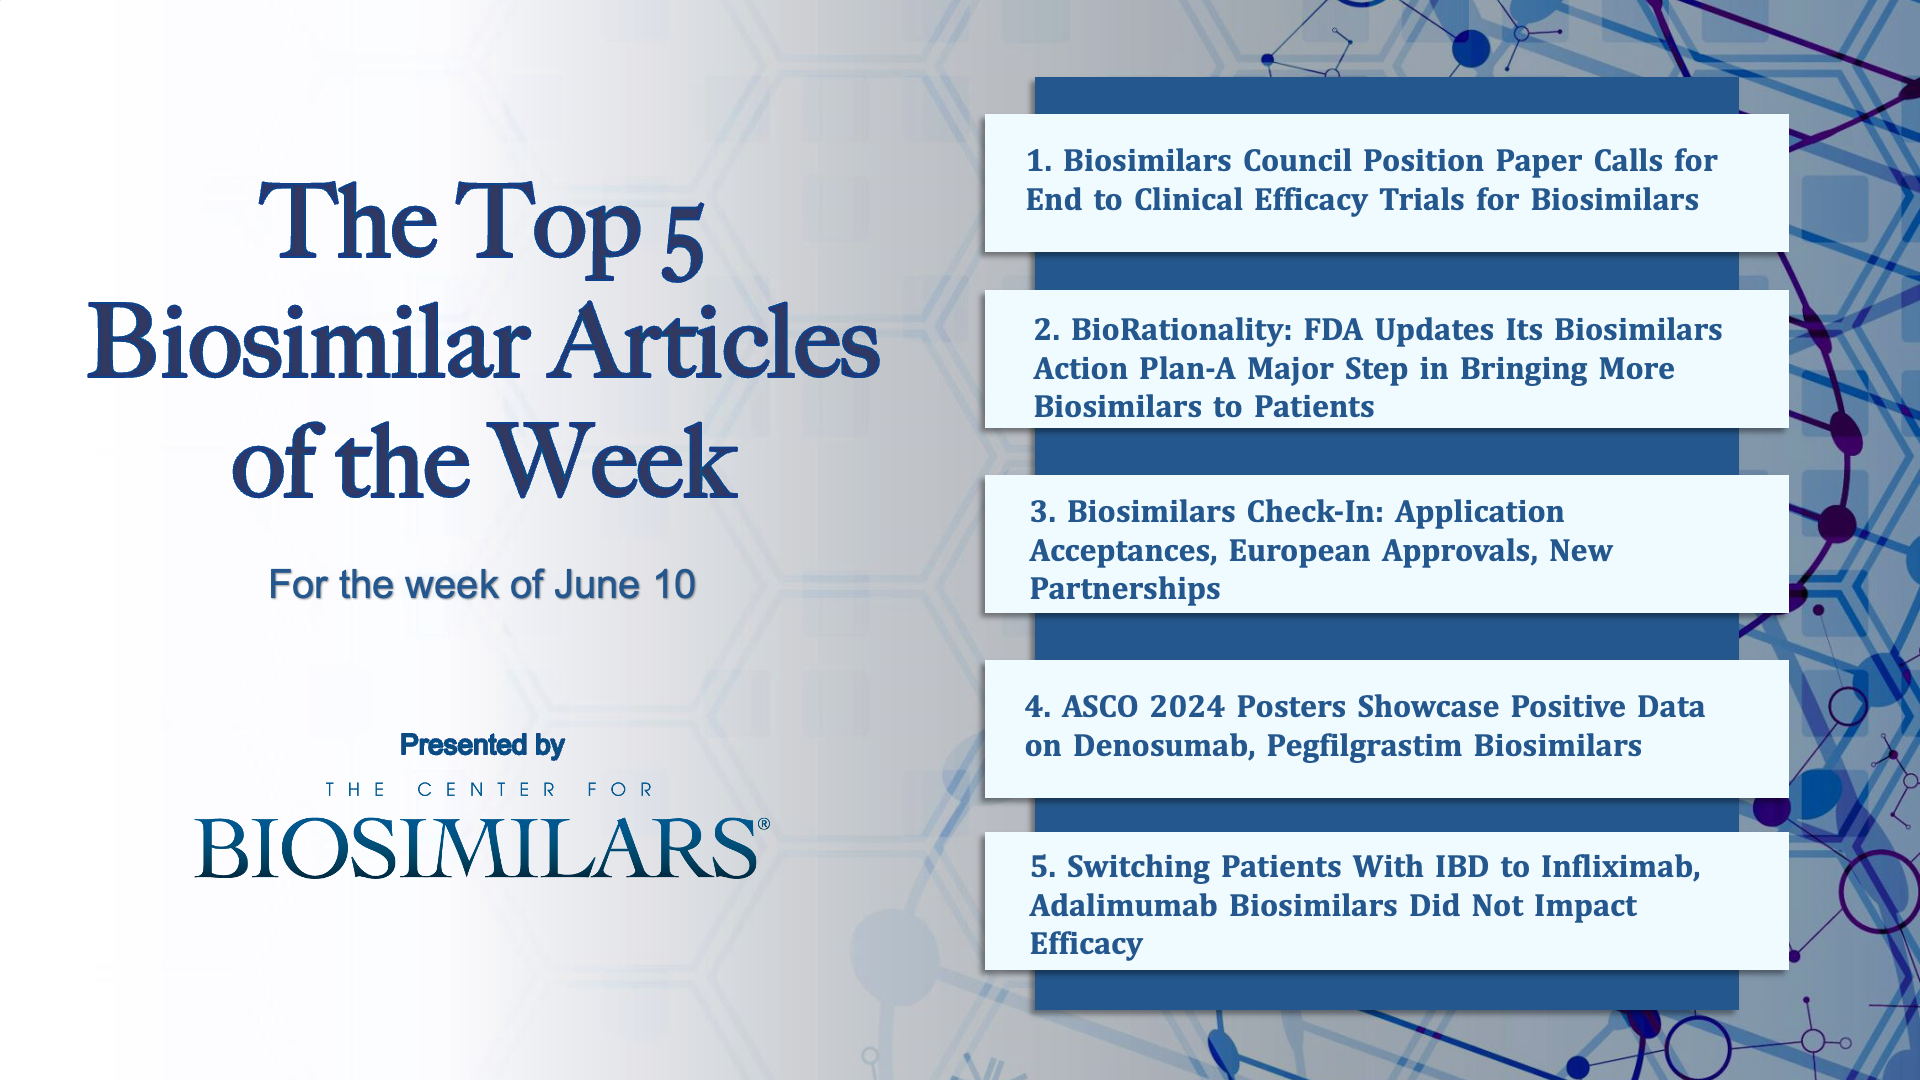 Here are the top 5 biosimilar articles for the week of June 10, 2024.